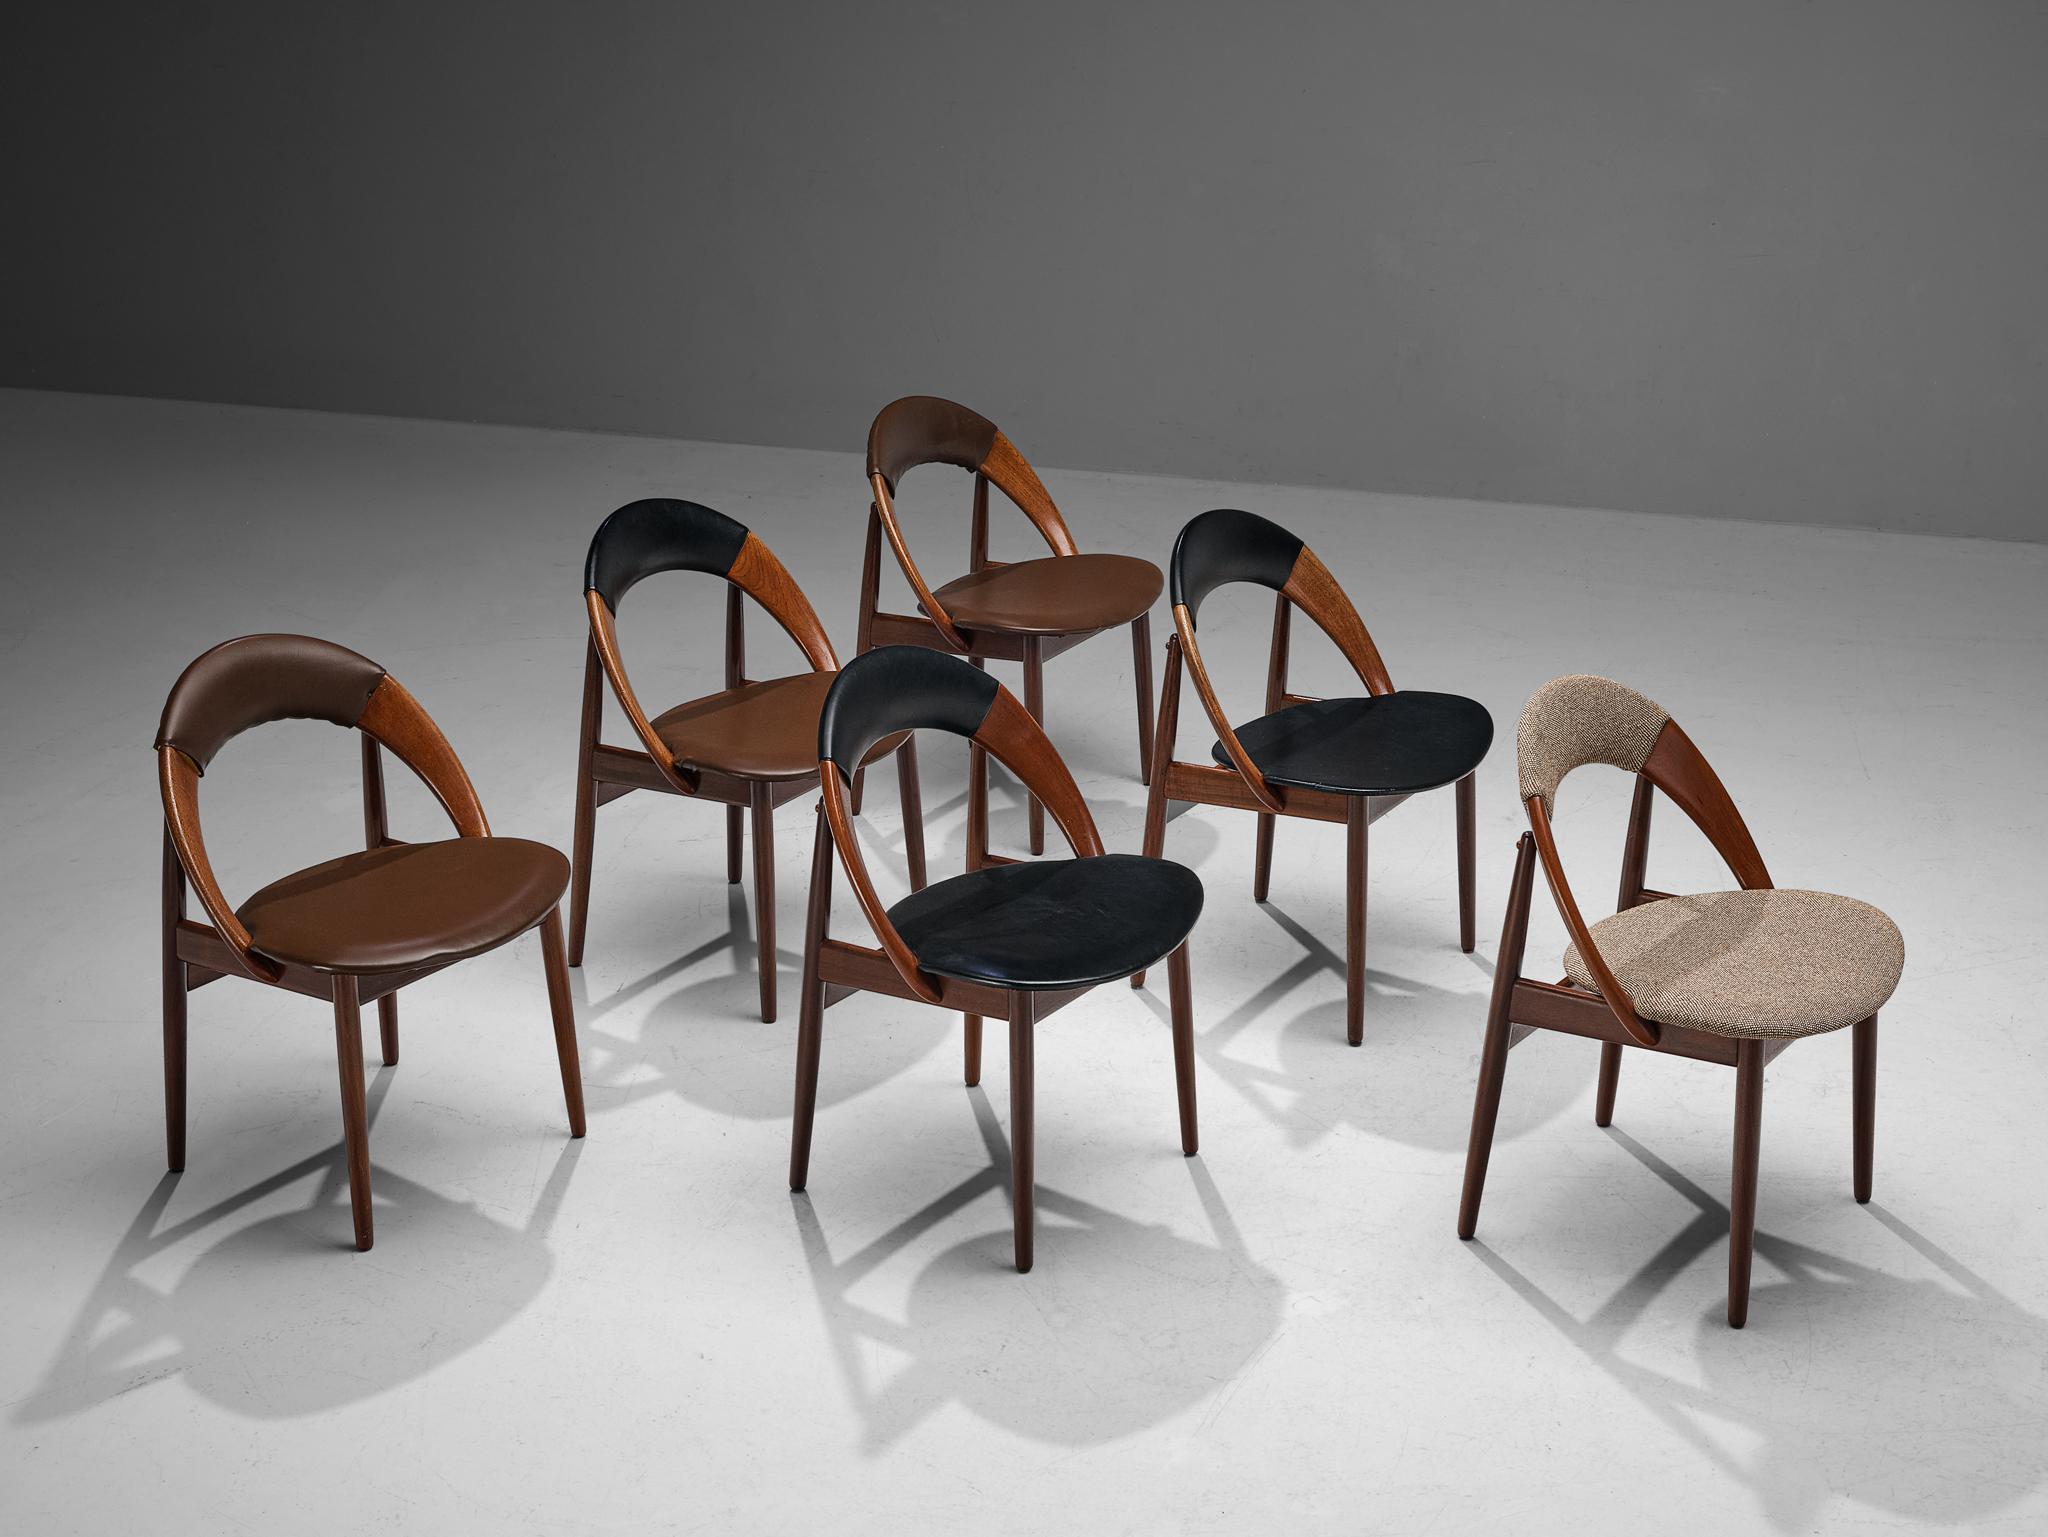 Arne Hovmand-Olsen & Ejvind A. Johansson, dining chairs, teak, leatherette, wool, Denmark, 1960s 

Set of six dining chairs designed by the Danish designers Arne Hovmand-Olsen & Ejvind A. Johansson. The chairs have a very simple and organic design.